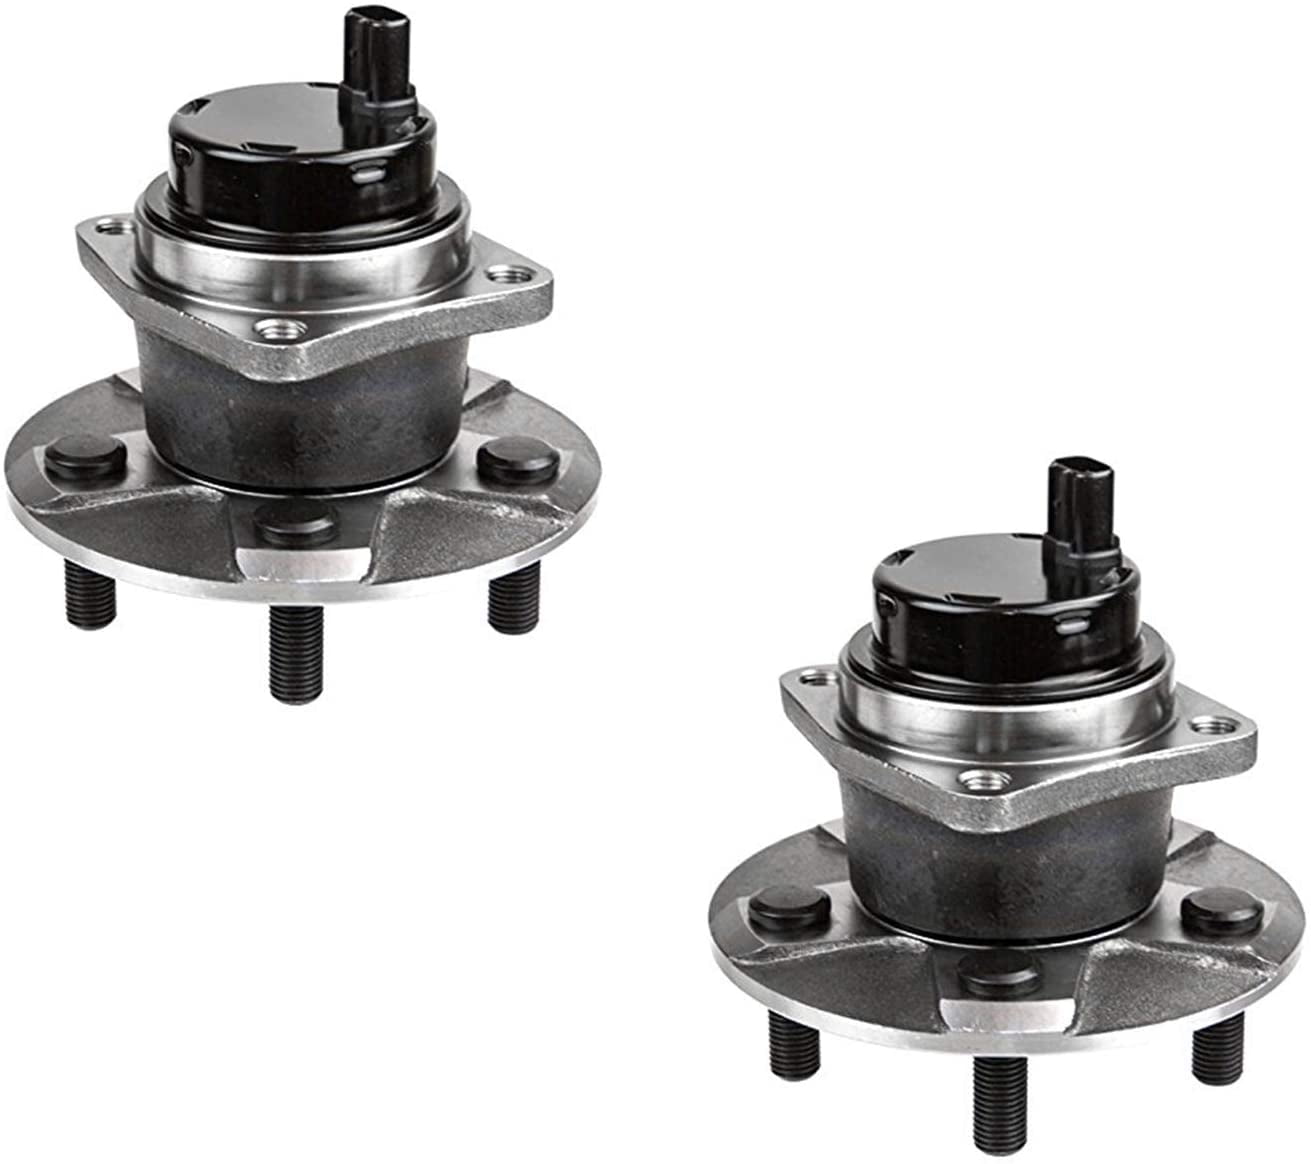 2 Rear Wheel Bearing Hub Assembly Pair Set Fits Scion tC For Toyota Celica W/ABS